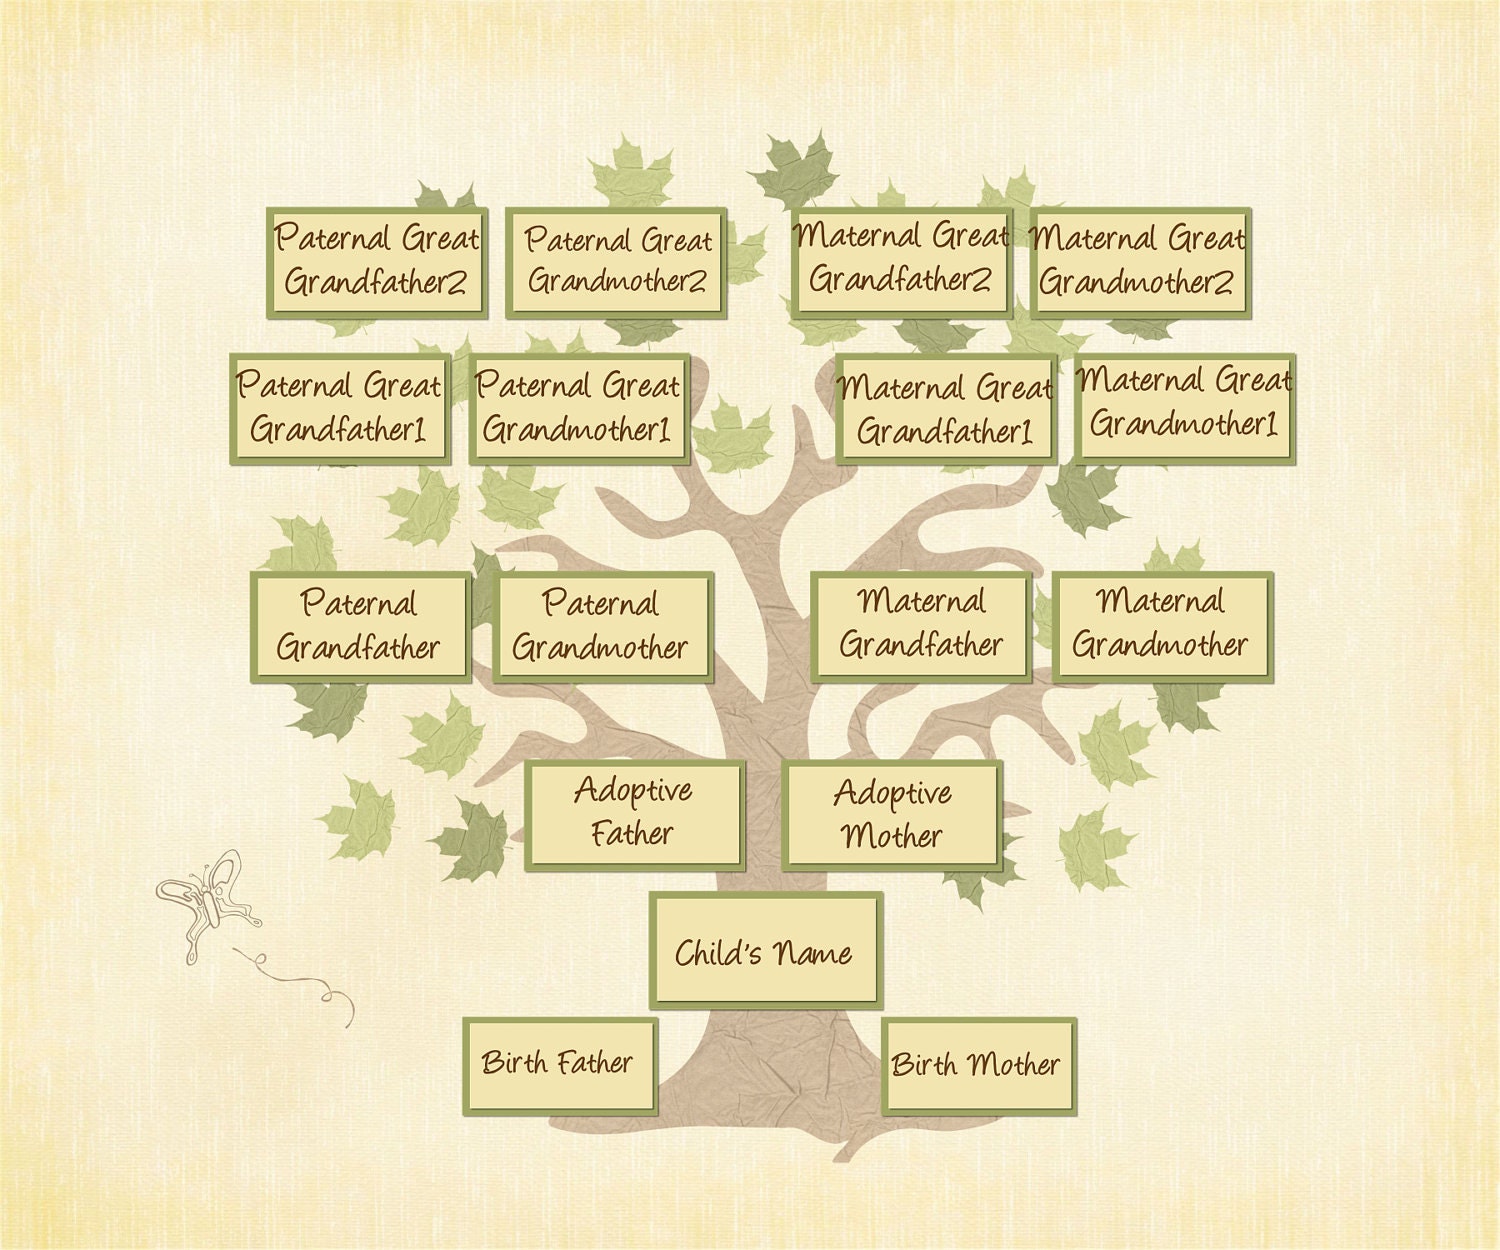  Family  Tree  for Adopted Child Art Canvas 10x12